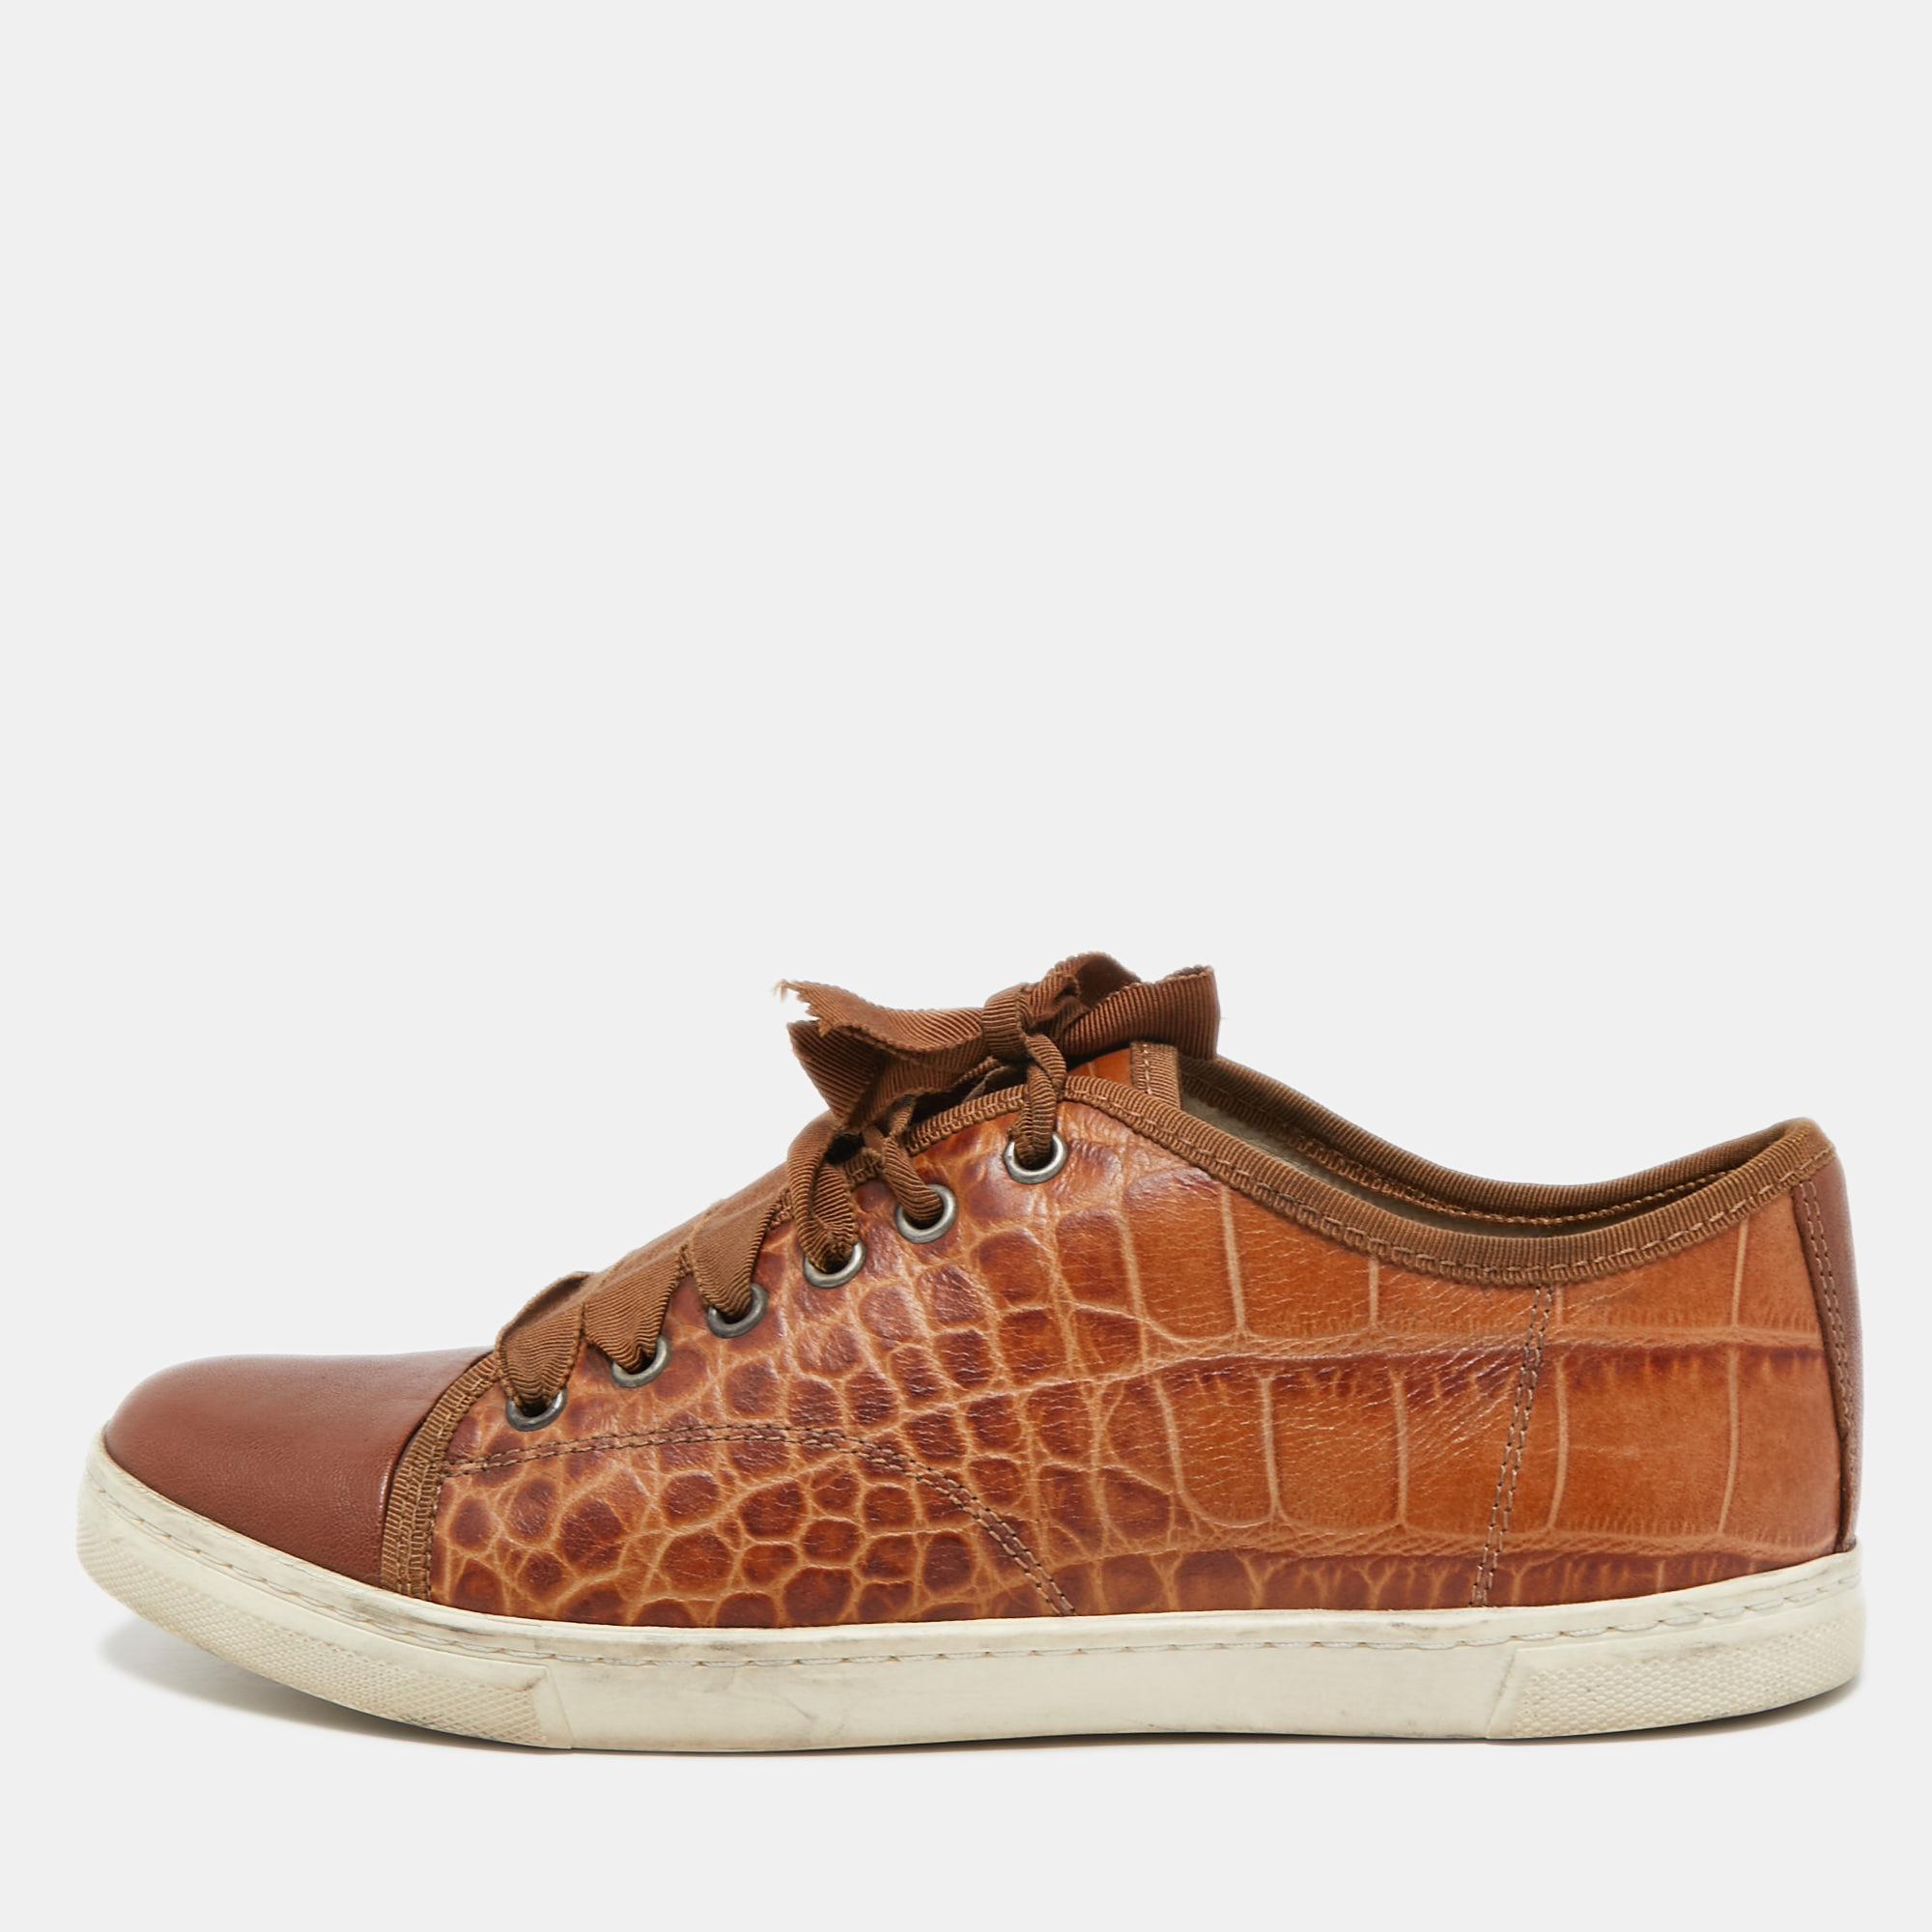 Lanvin Brown Embossed Croc And Leather Low Top Sneakers Size 39